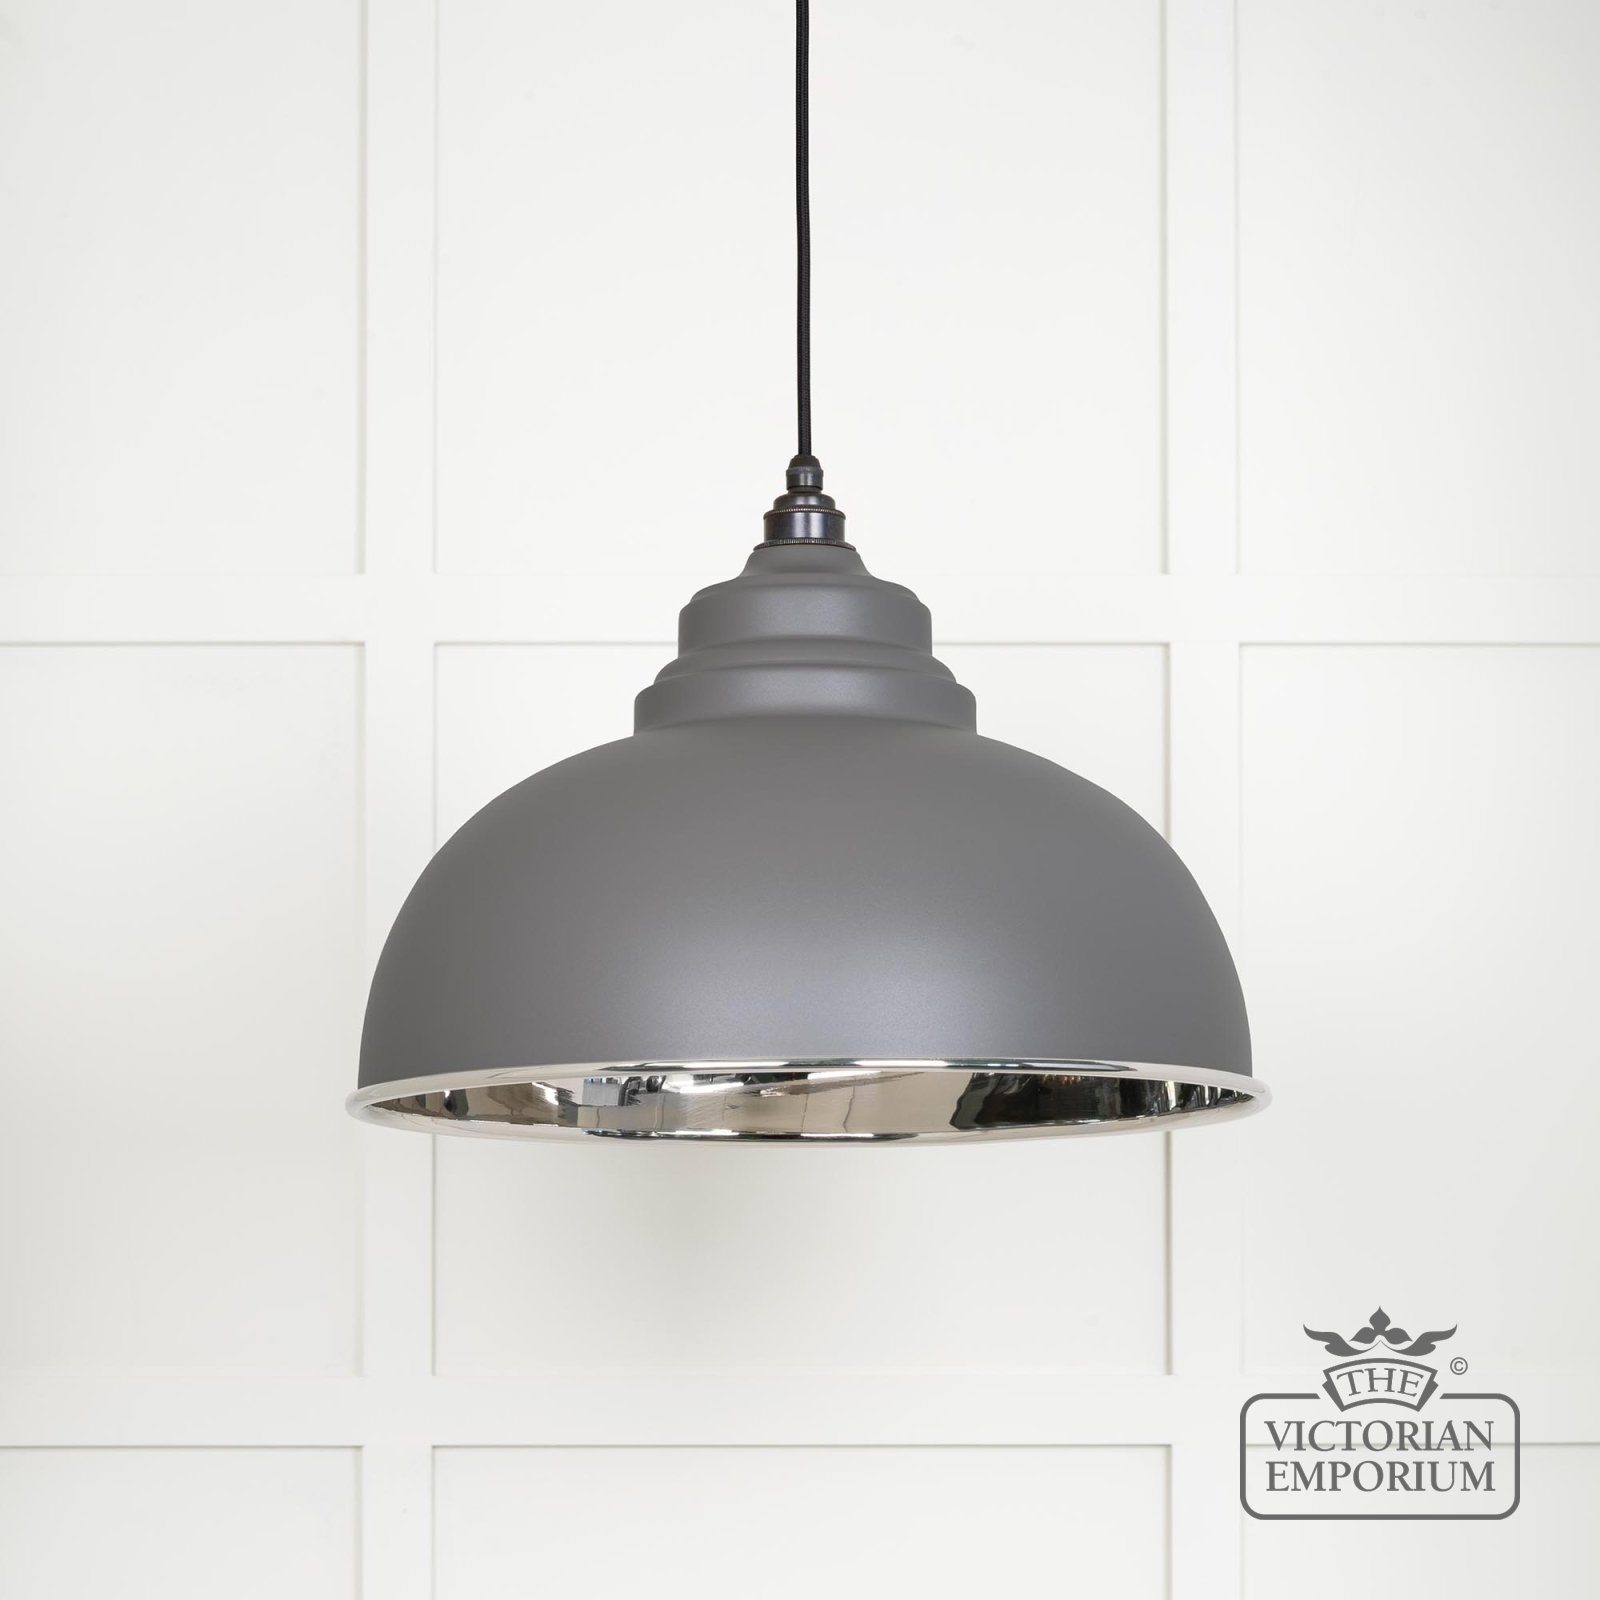 Harlow pendant light in smooth nickel with Bluff exterior